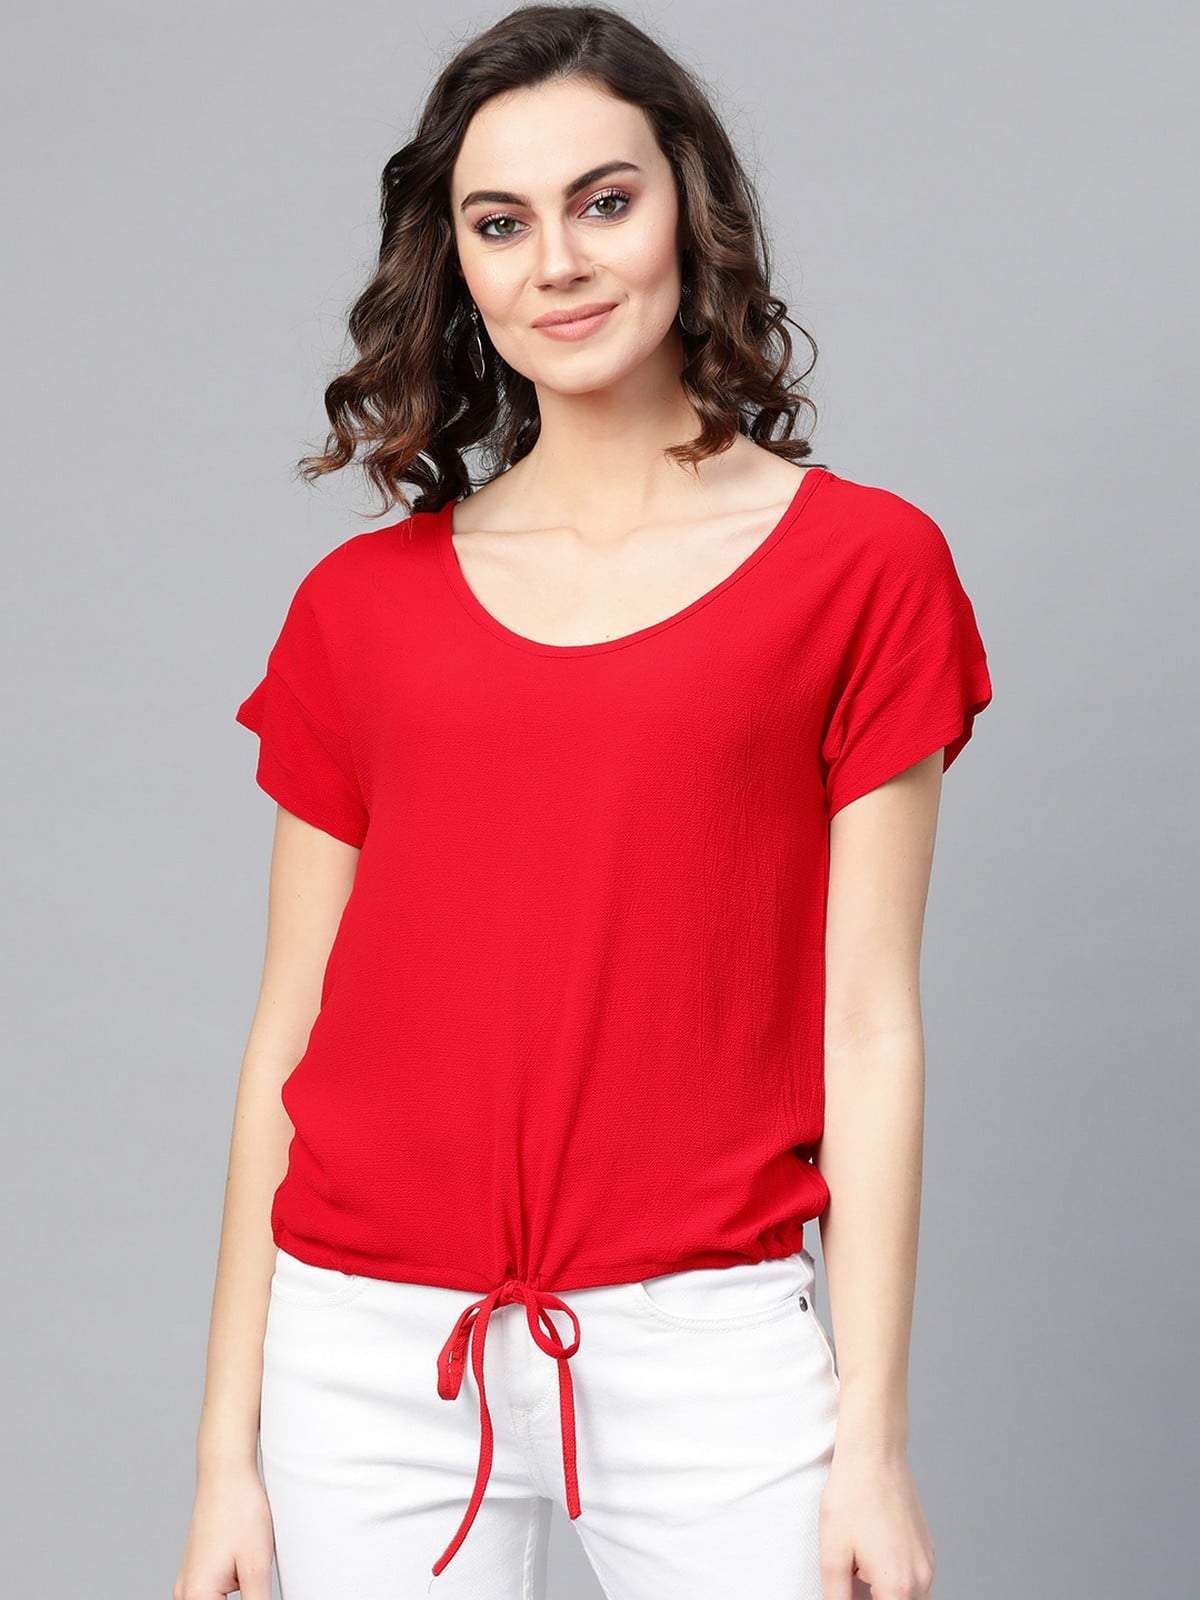 Women's Red Bubble Loose Fit Tunnel Top - Pannkh